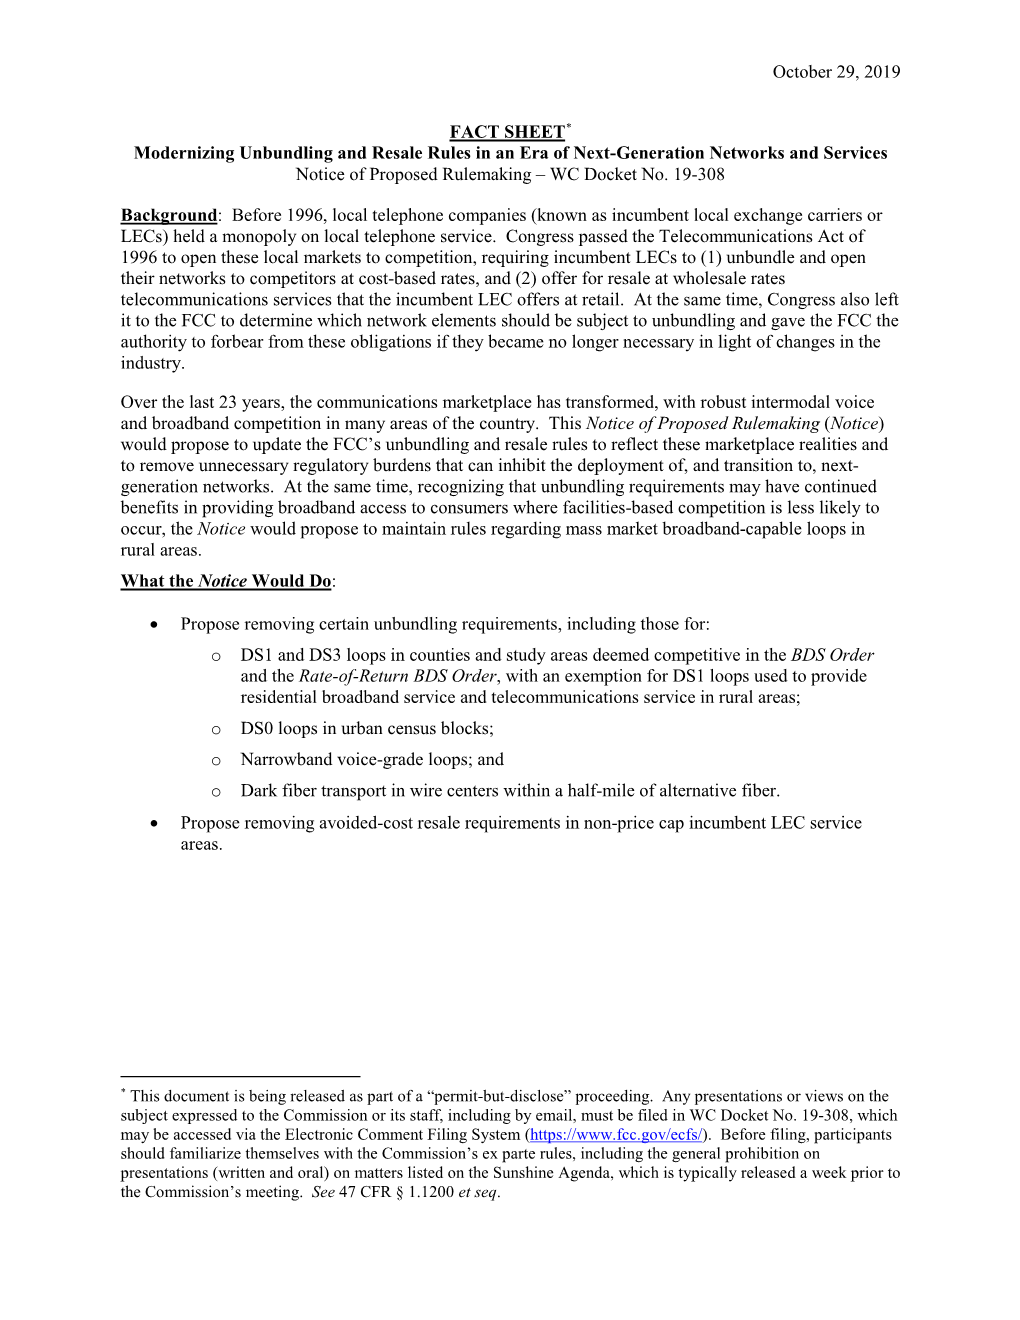 Notice of Proposed Rulemaking – WC Docket No